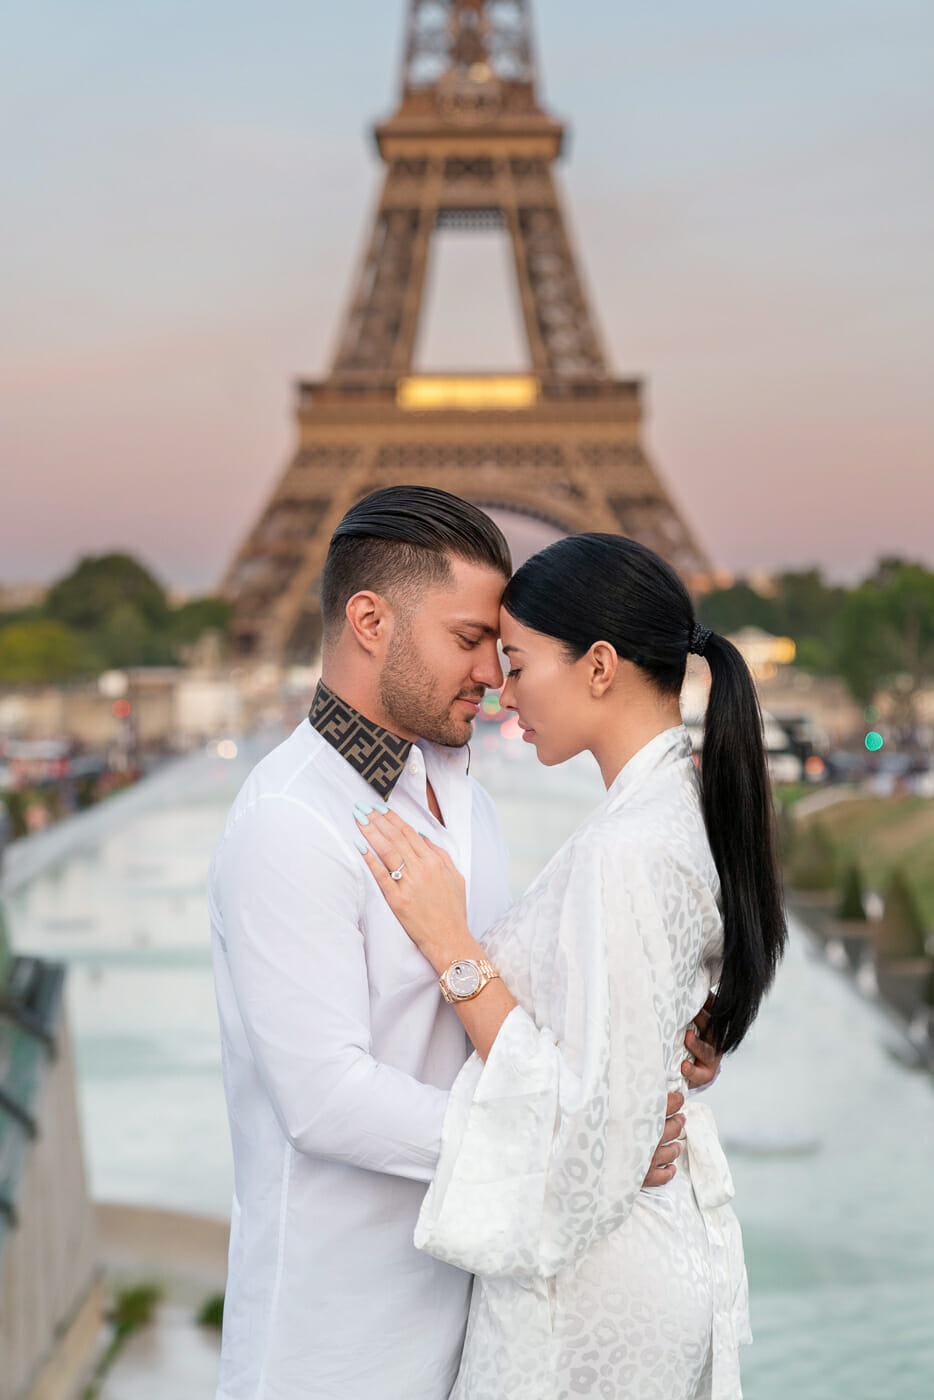 Couple photography poses for engagement style photos